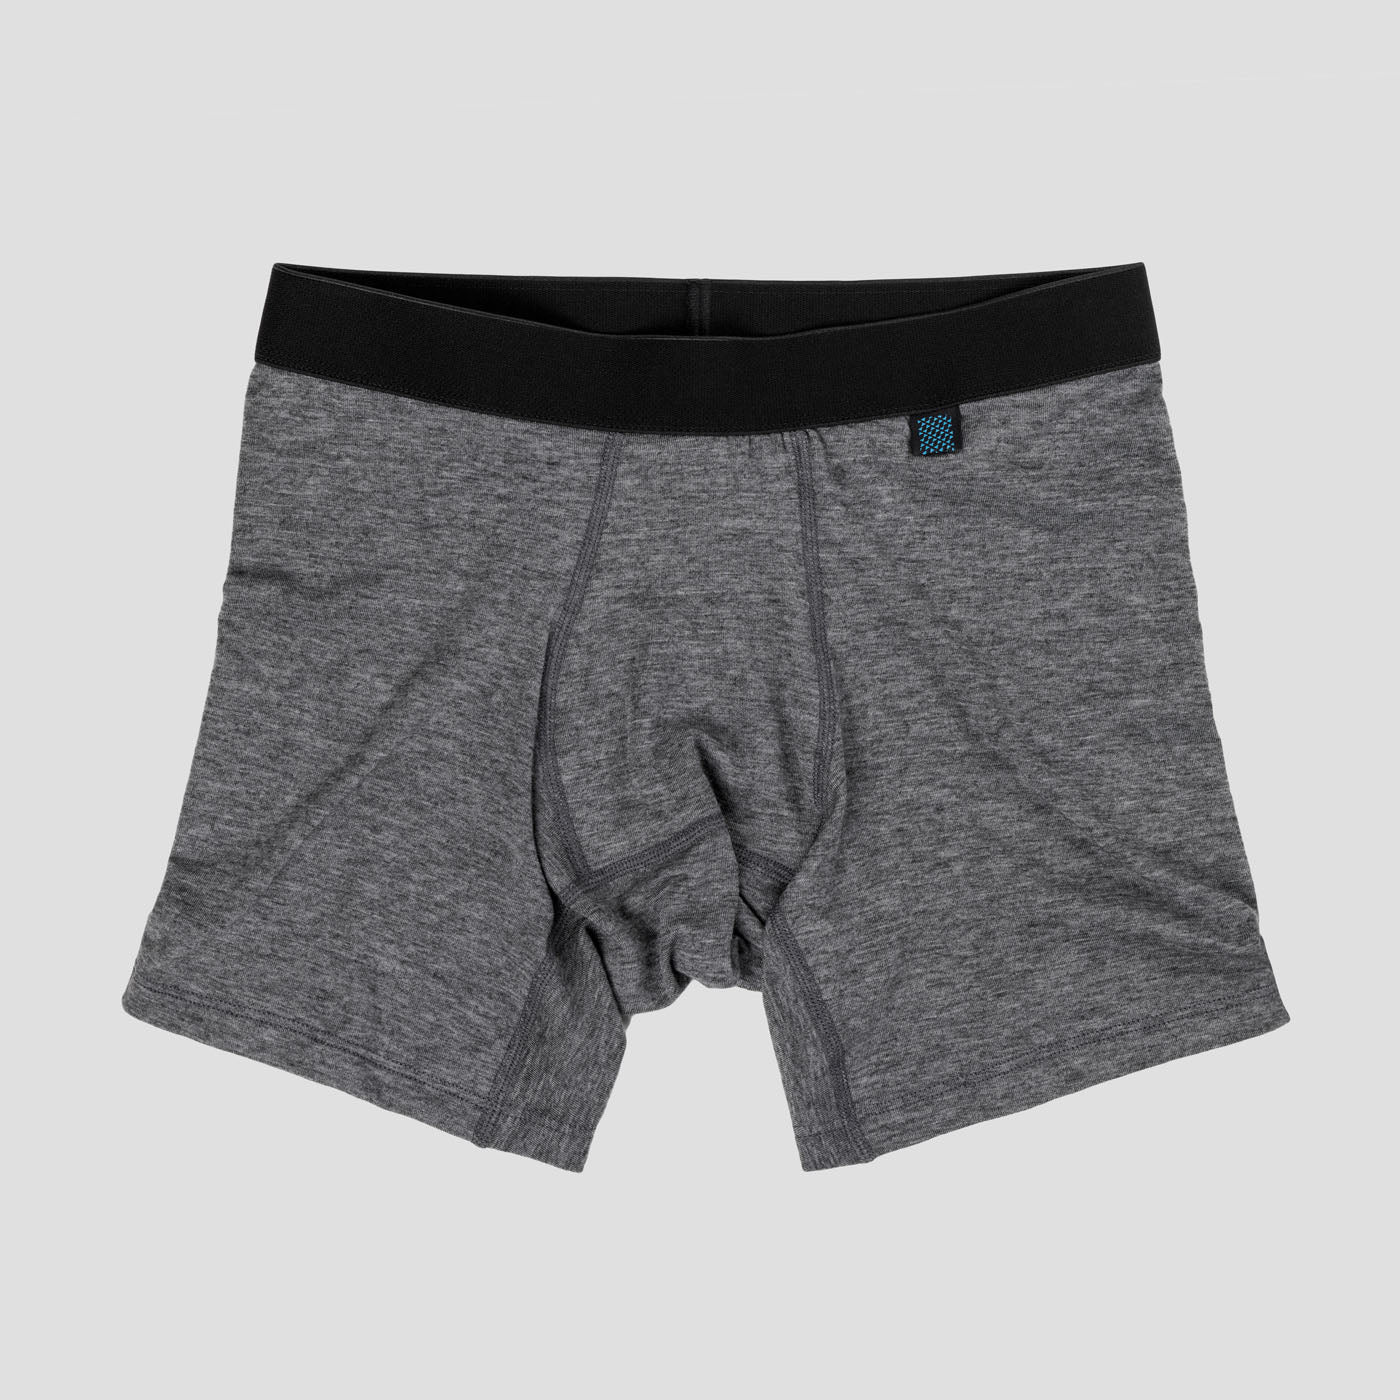 Men's Merino Boxer Briefs - Charcoal (Limited Sizes) – Ornot Online Store